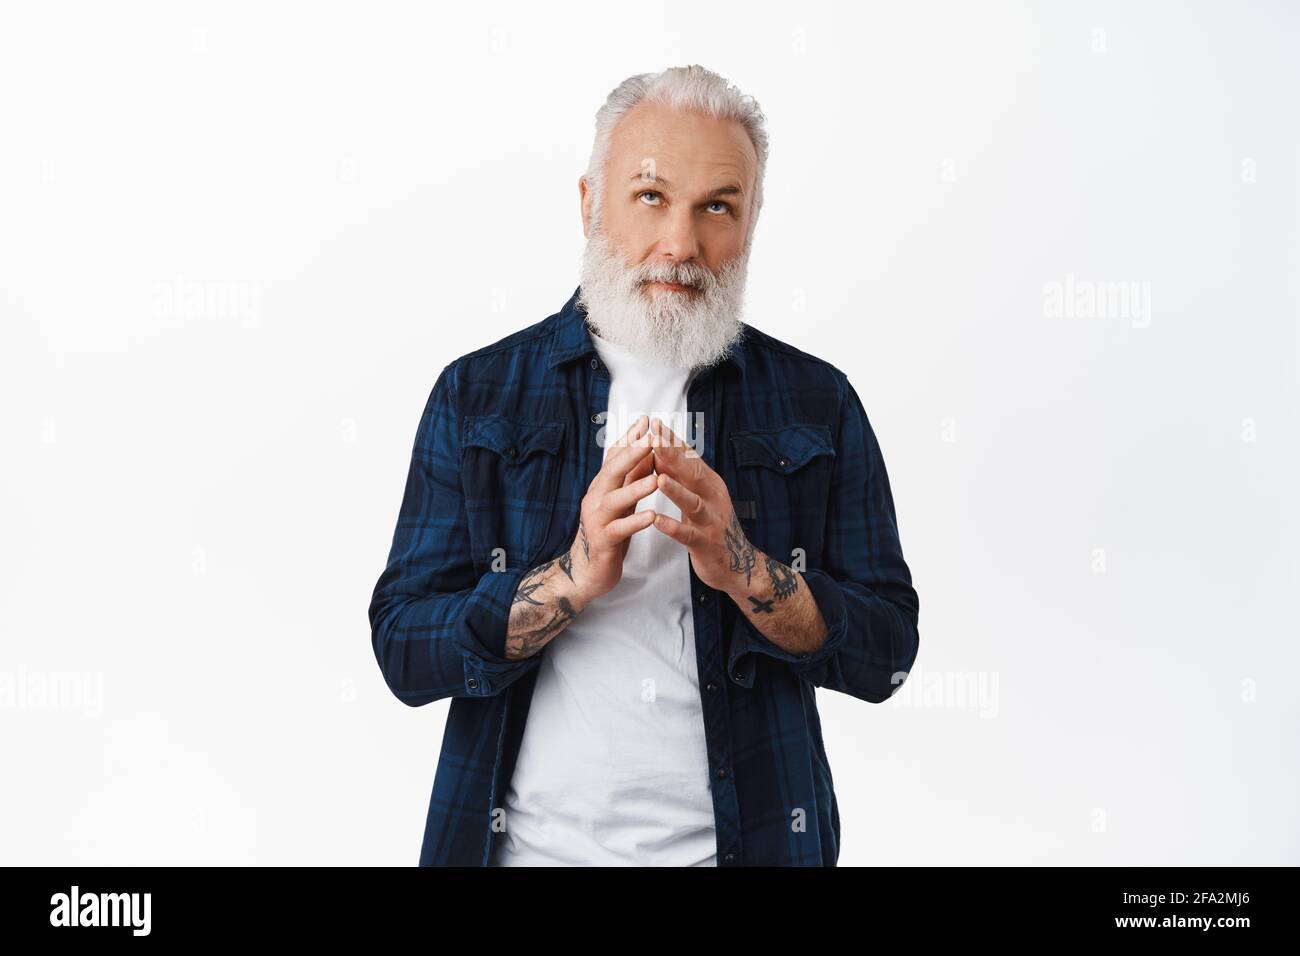 Thoughful old stylish man steeple fingers, looking up and thinking, making plan, scheming like evil genius while reading promotional text above head Stock Photo